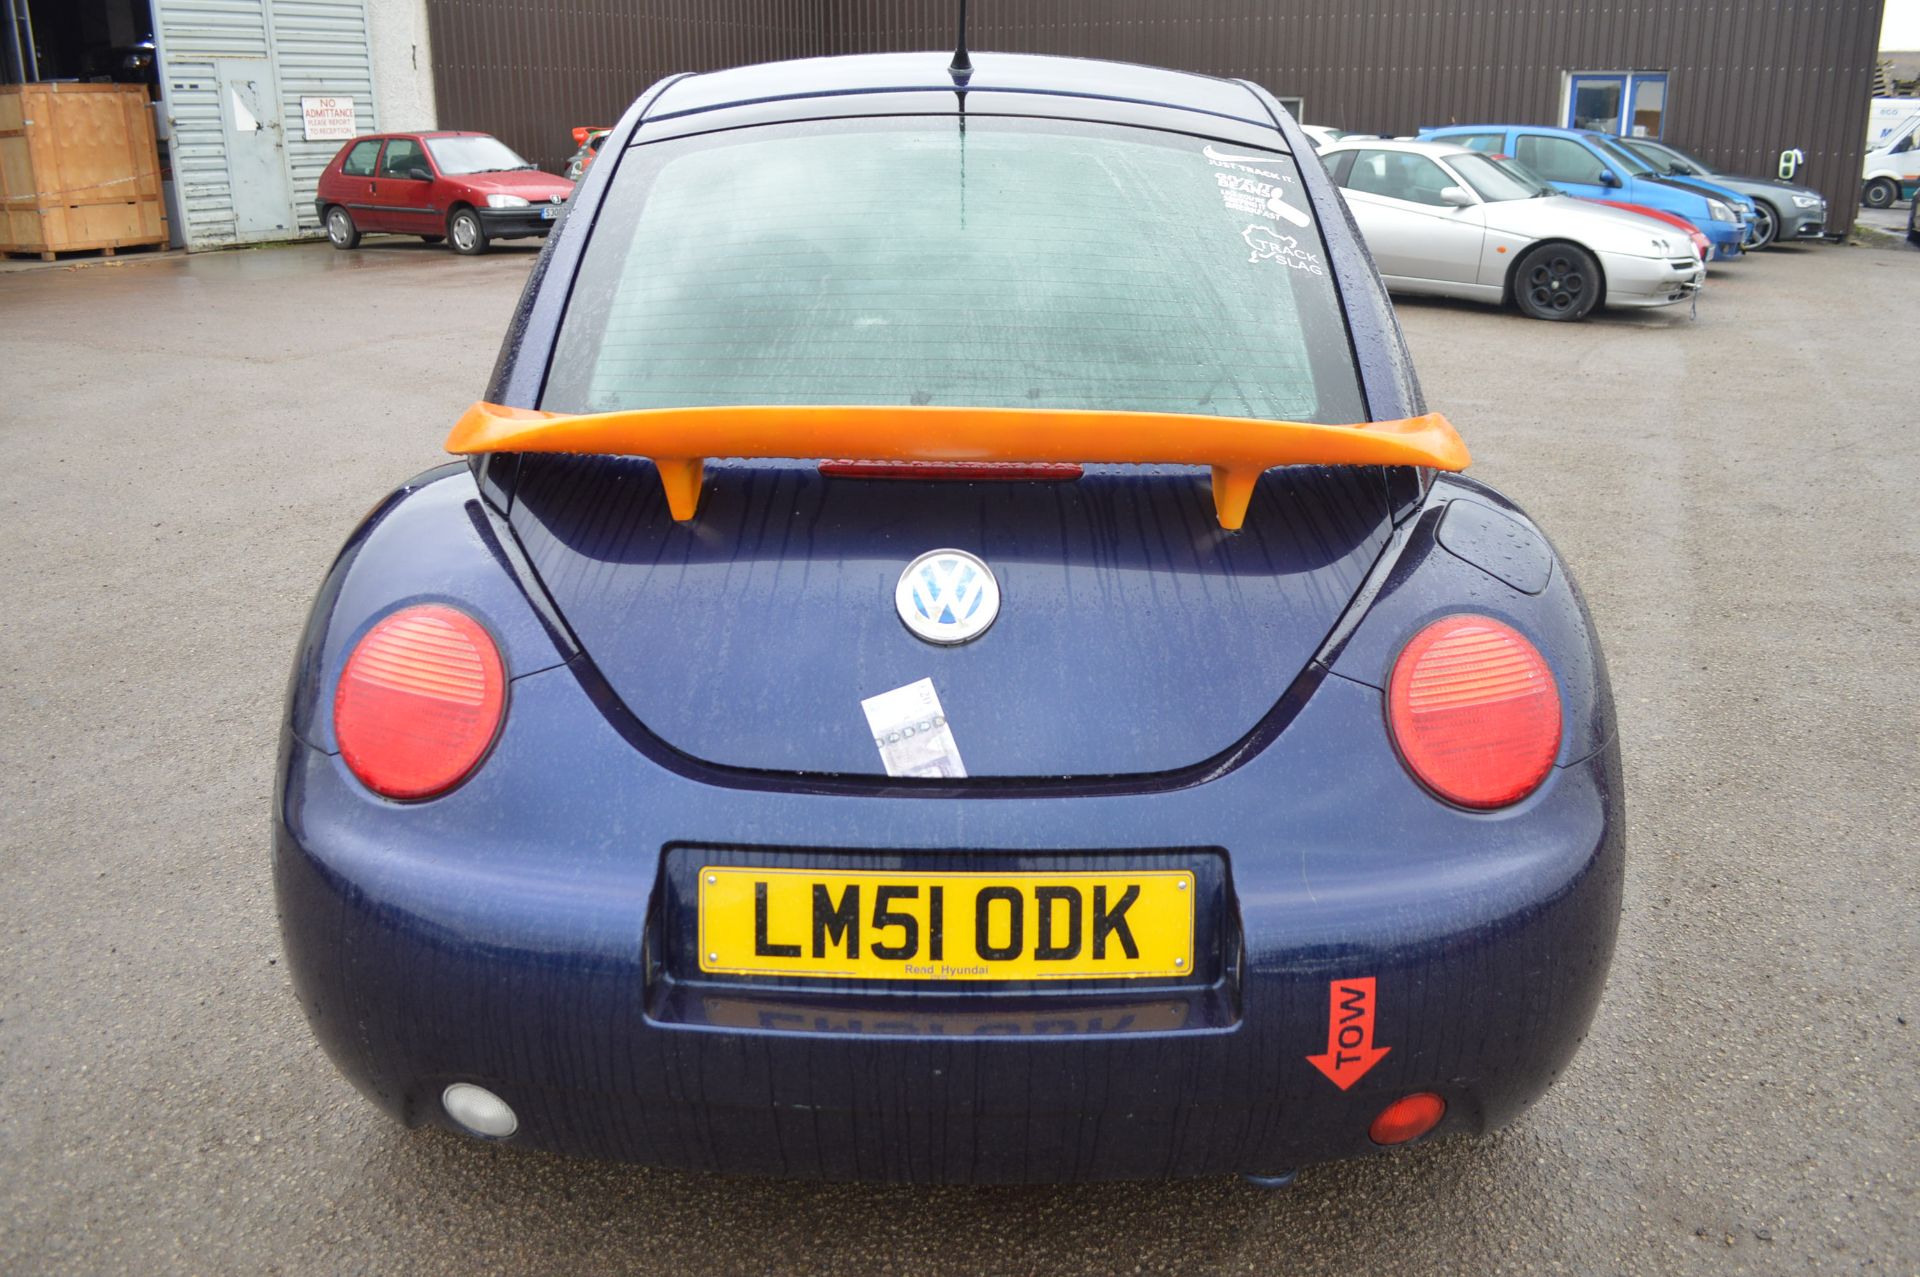 2001/51 REG VOLKSWAGEN BEETLE TURBO 1.8 TRACK CAR 5 SPEED MANUAL GOOD STRONG ENGINE AND BOX HAS JUST - Image 5 of 16